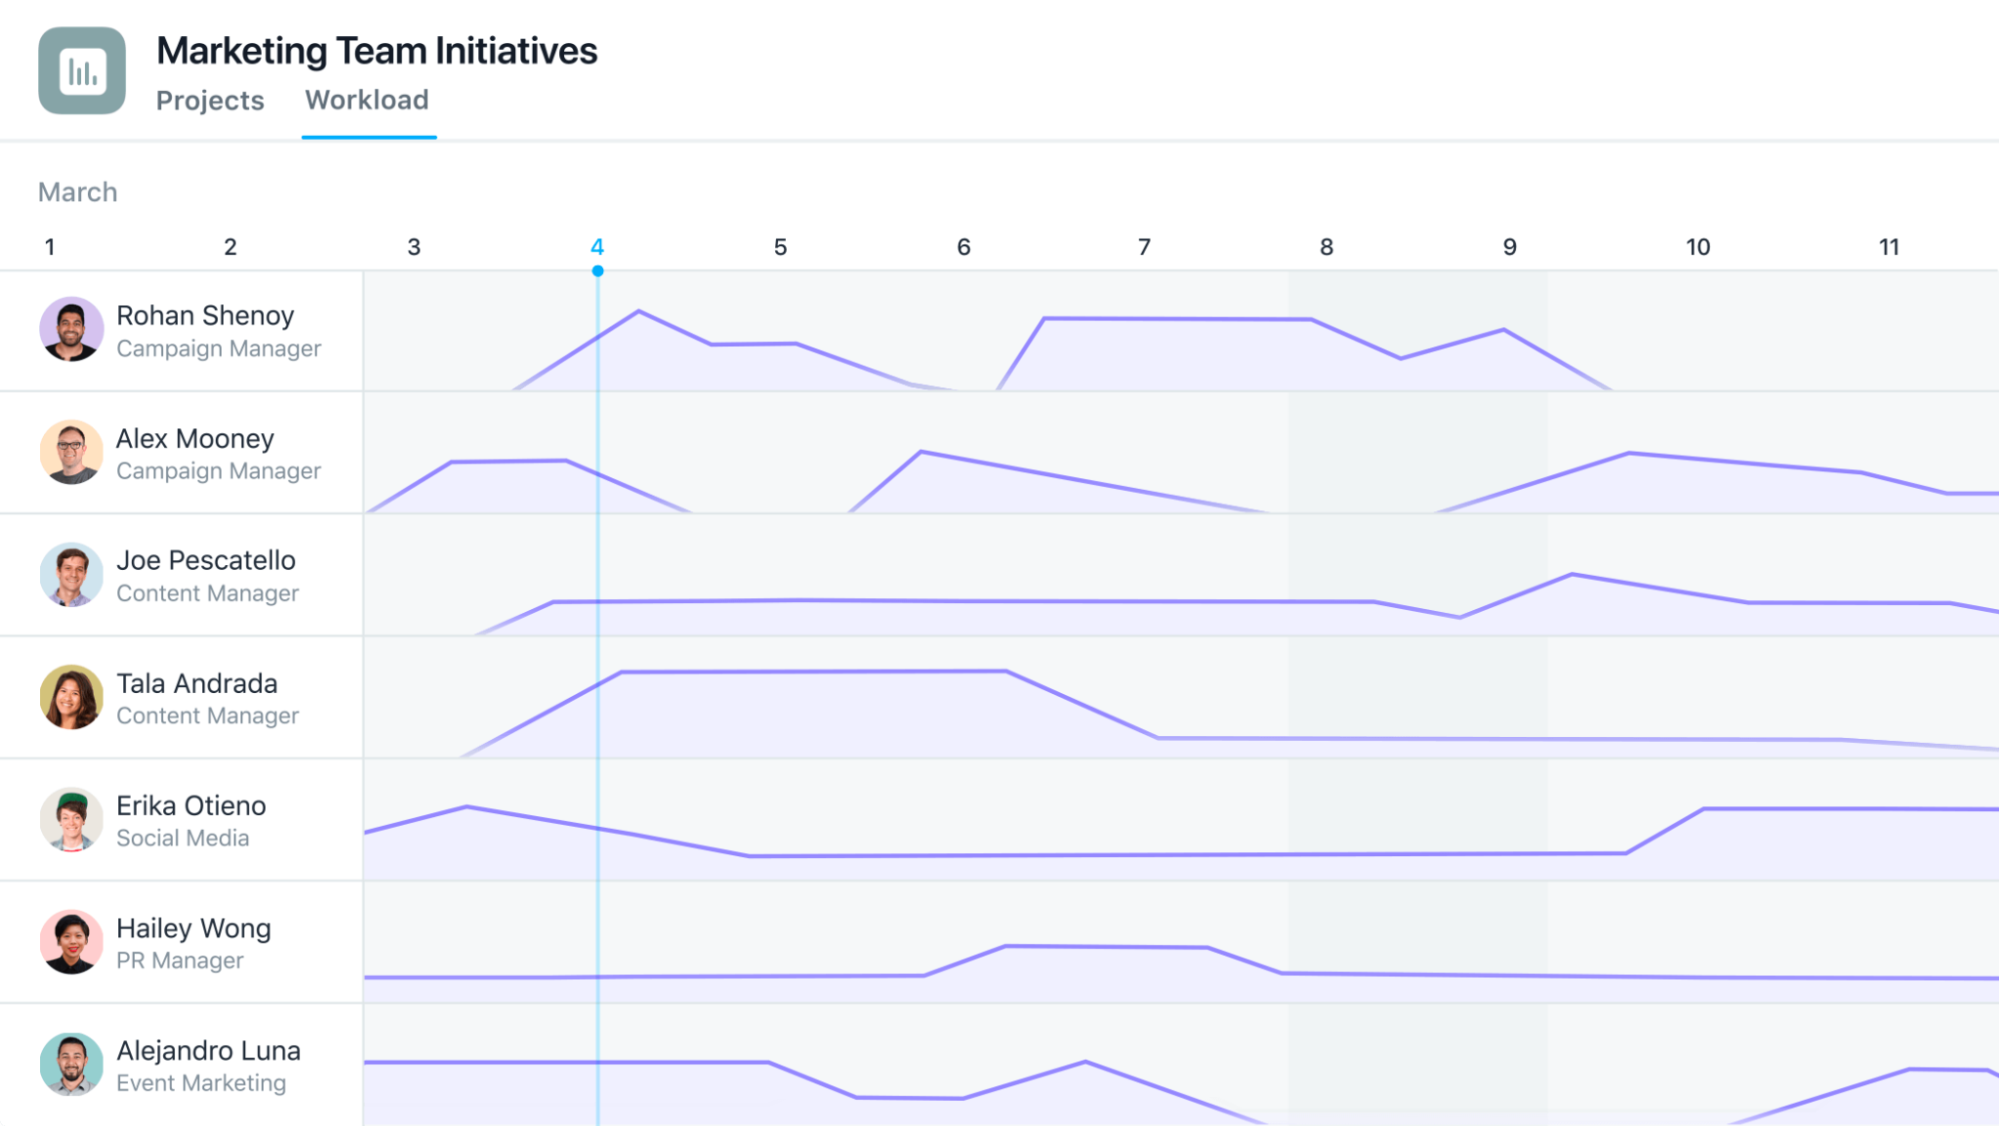 Asana interface showing the workload view for the project "Marketing Team Initiatives," which features graphs representing work assigned to each team member for specific dates